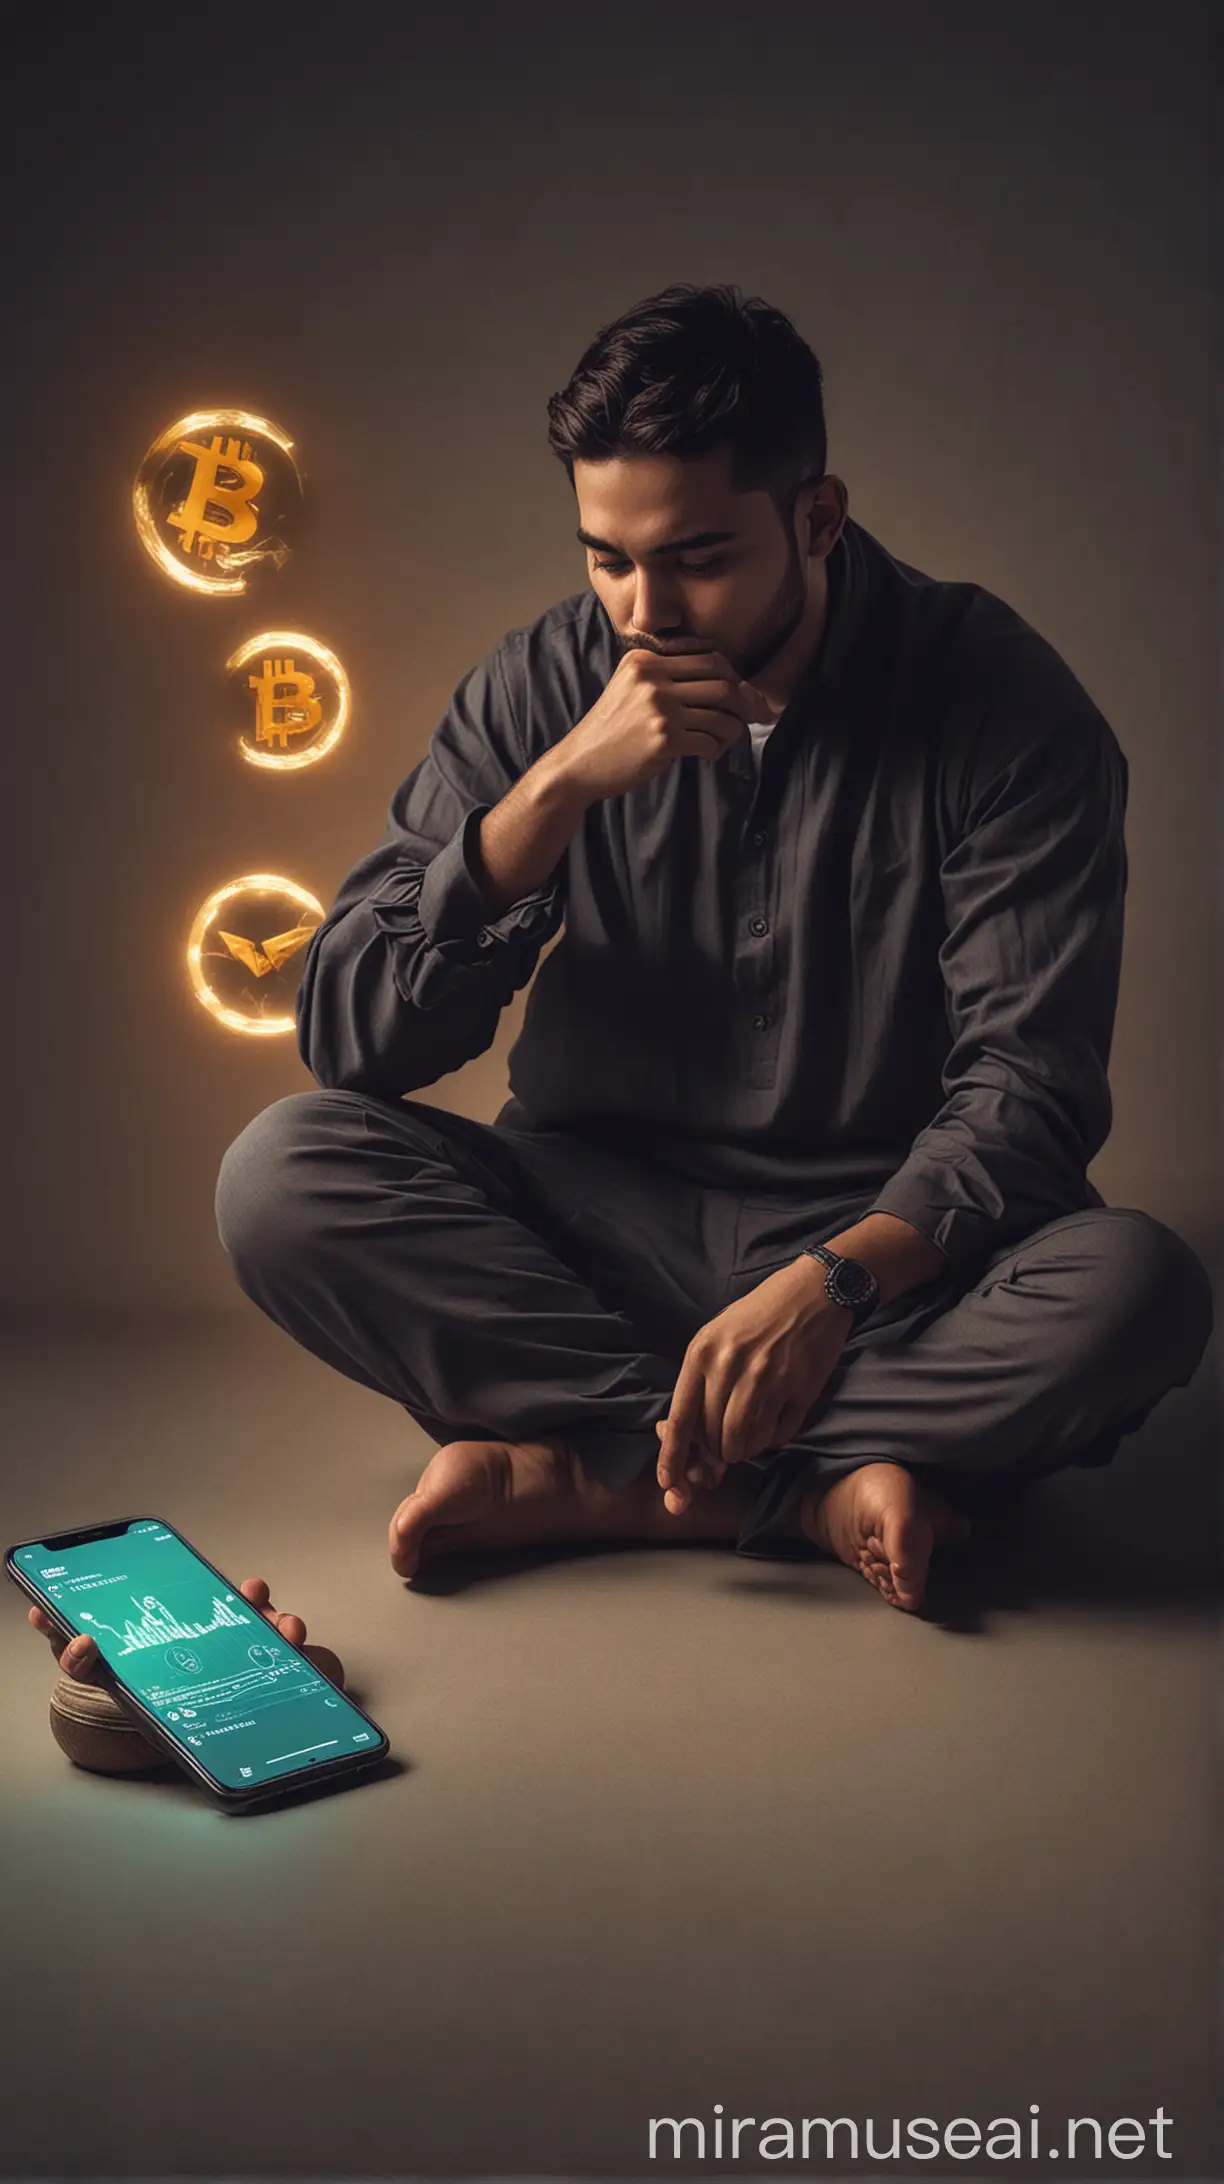 Islamic Finance Contemplation Person Viewing Cryptocurrency Charts